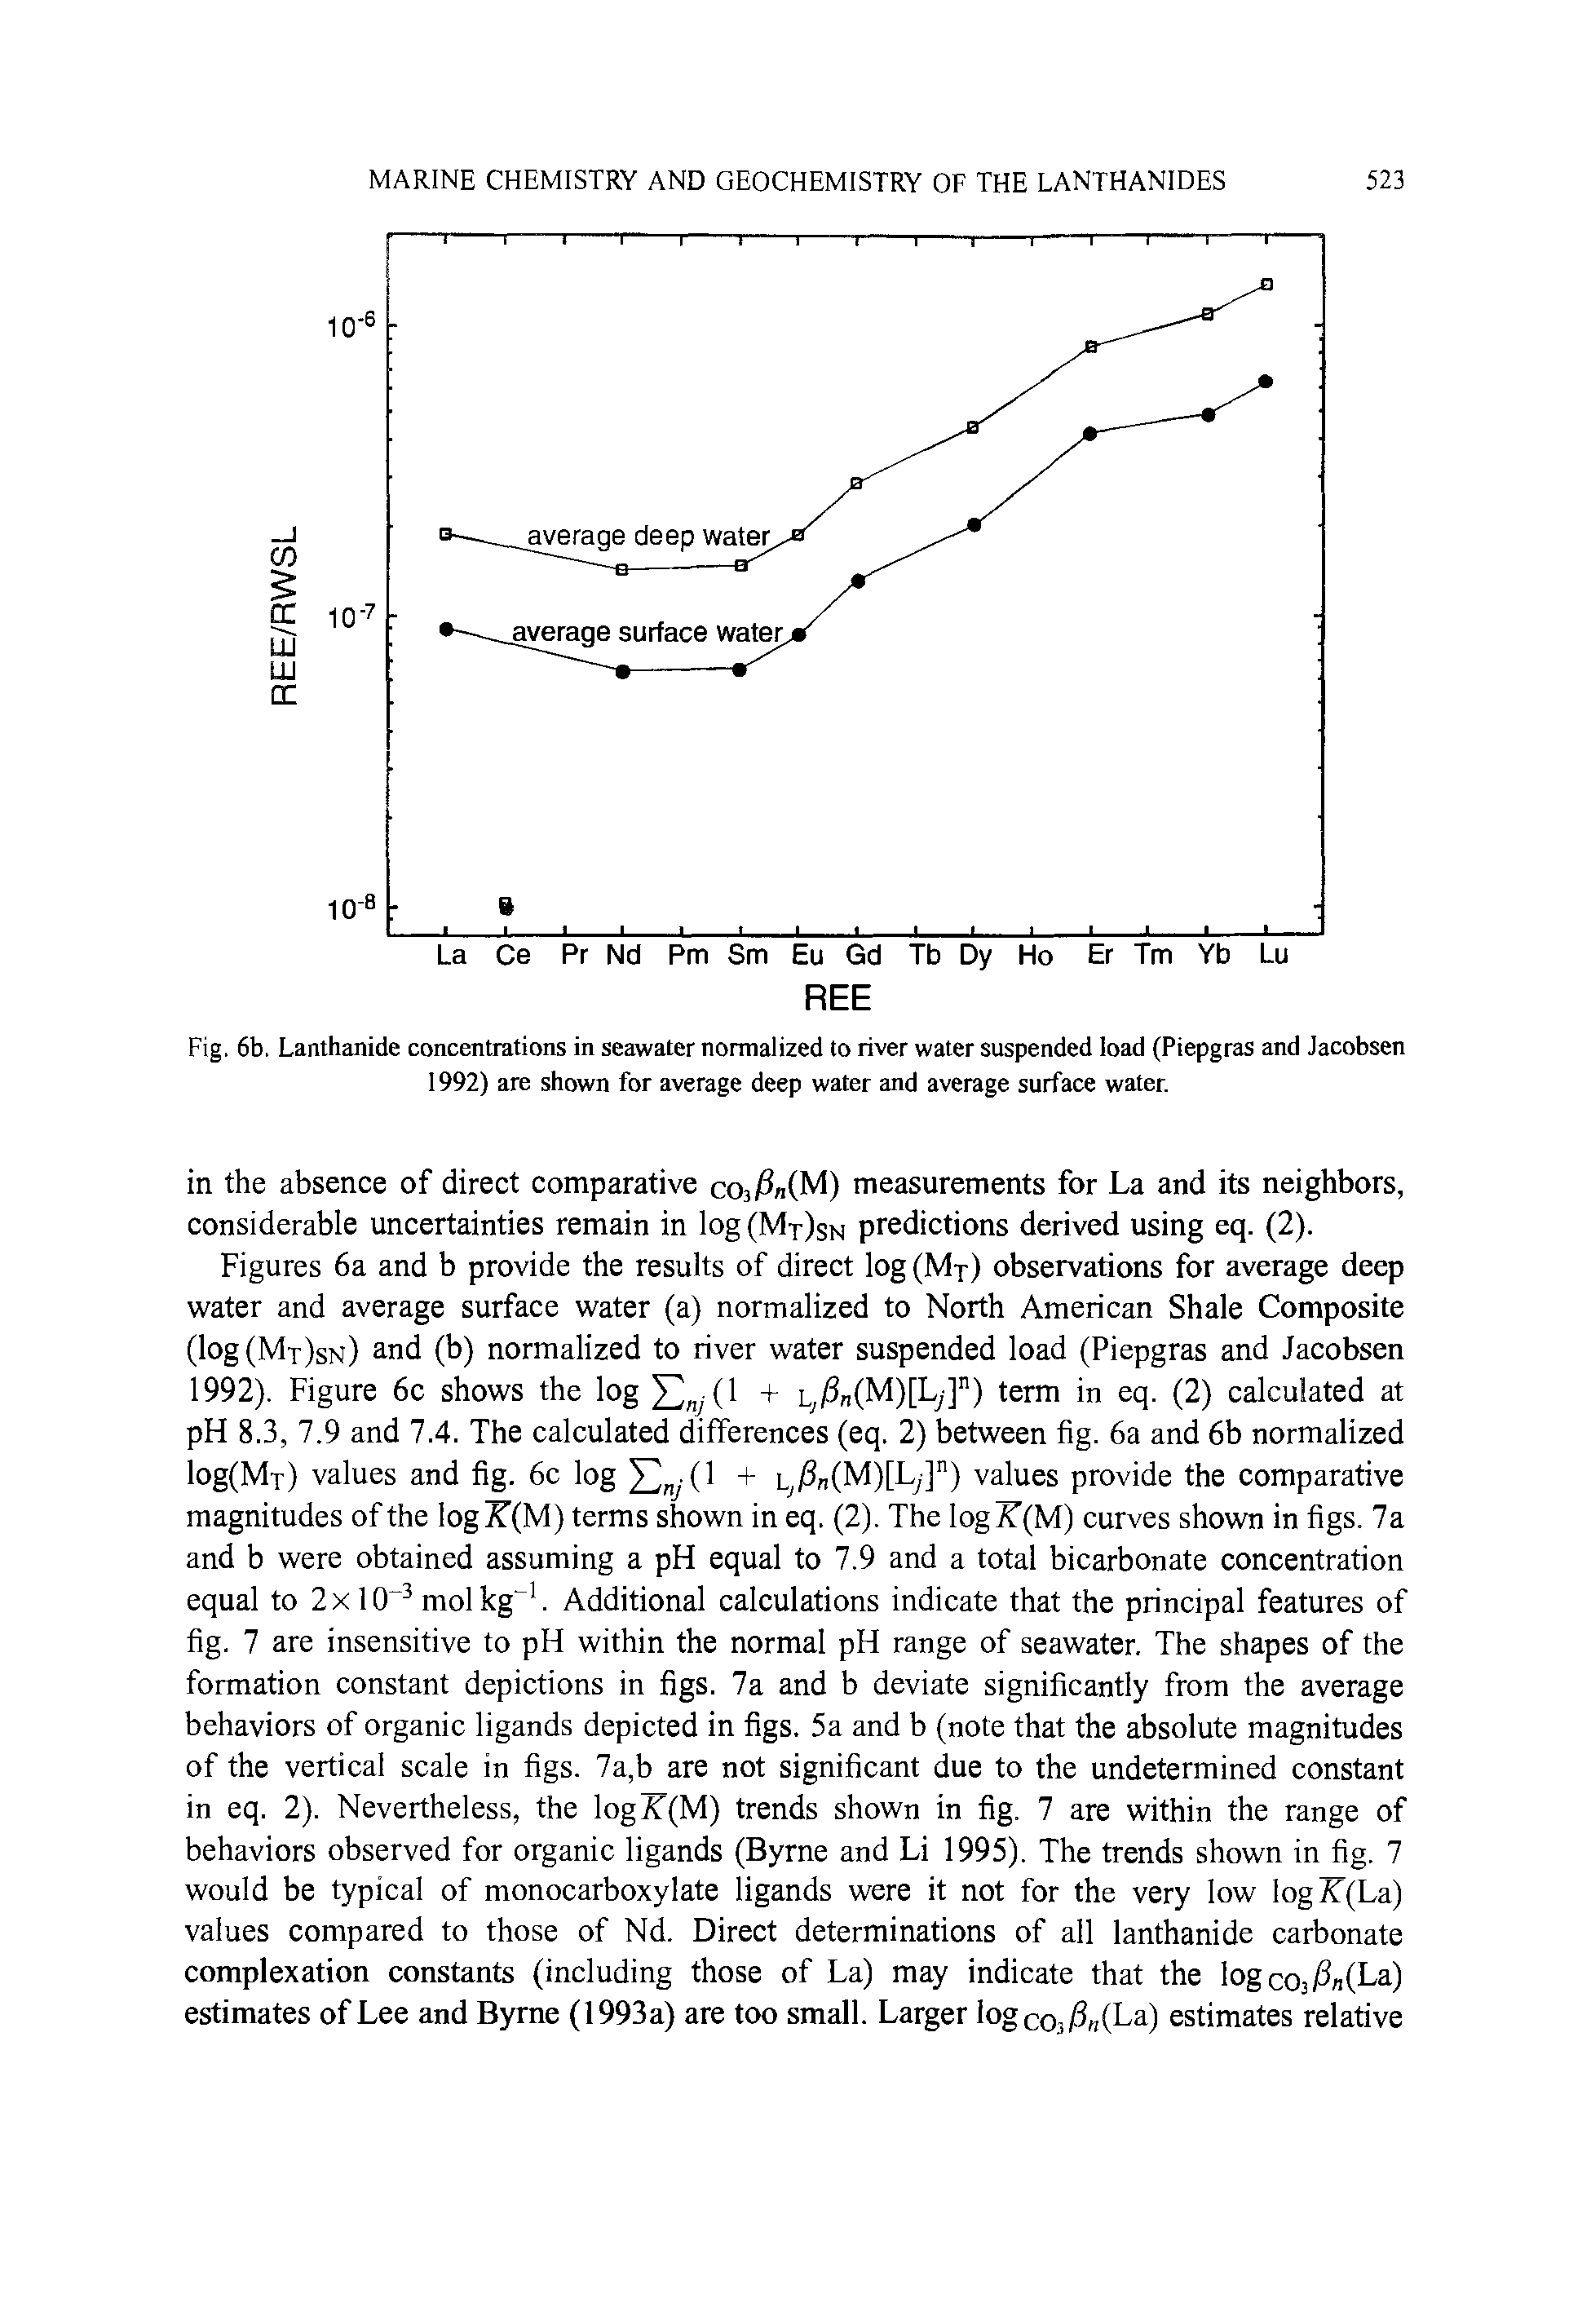 Fig. 6b. Lanthanide concentrations in seawater normalized to river water suspended load (Piepgras and Jacobsen 1992) are shown for average deep water and average surface water.